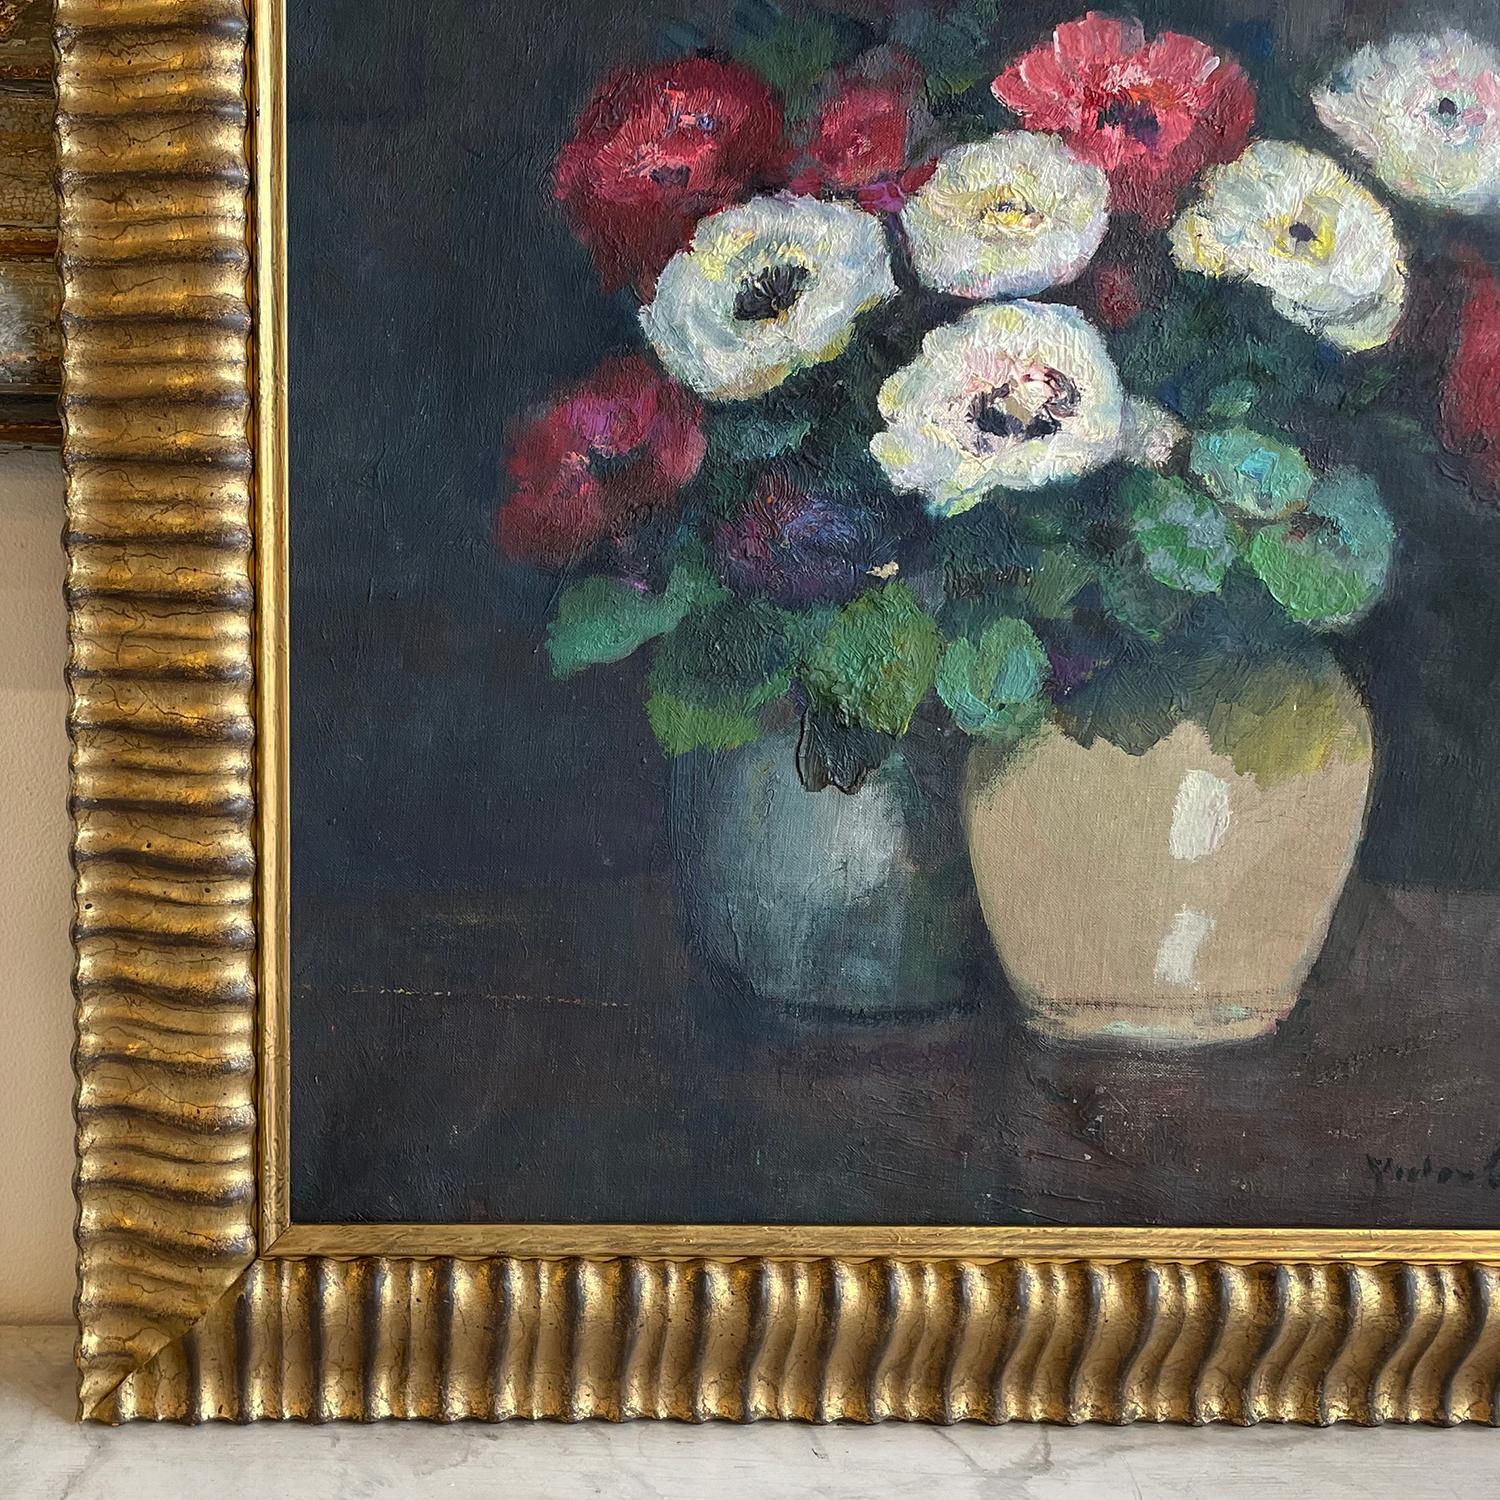 A French oil on canvas painting of two colorful vases with red and white anemones, flowers painted by Victor Charreton, in good condition. The blue and cream vases are standing on a wooden working table. The antique painting represents the 19th